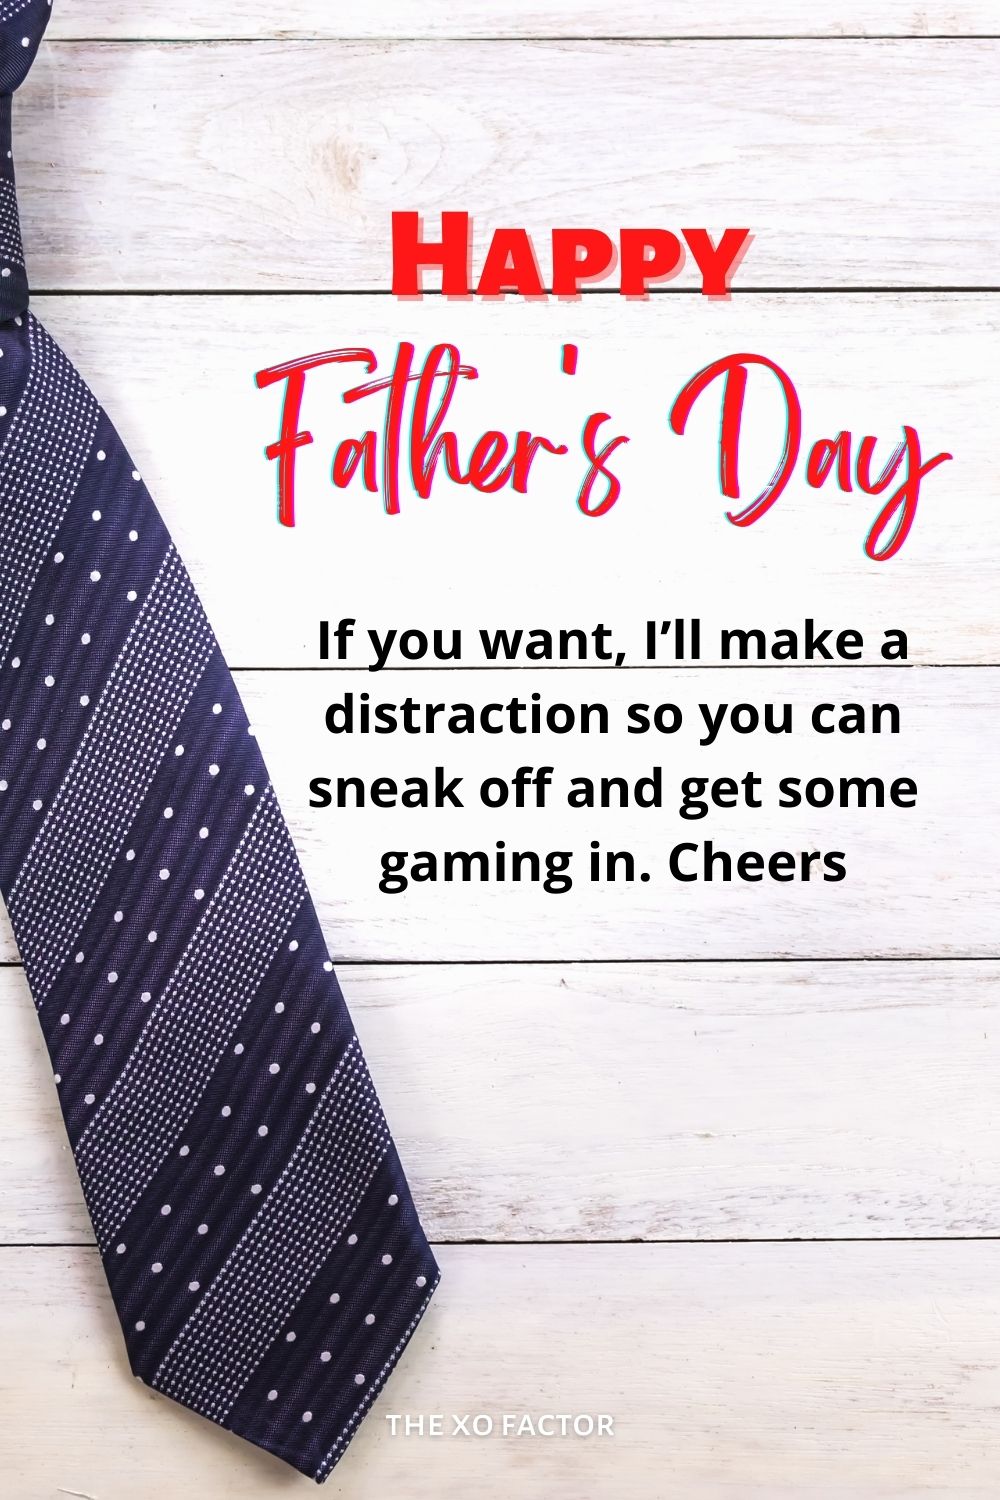 Happy Father’s day Dad! If you want, I’ll make a distraction so you can sneak off and get some gaming in. Cheers,